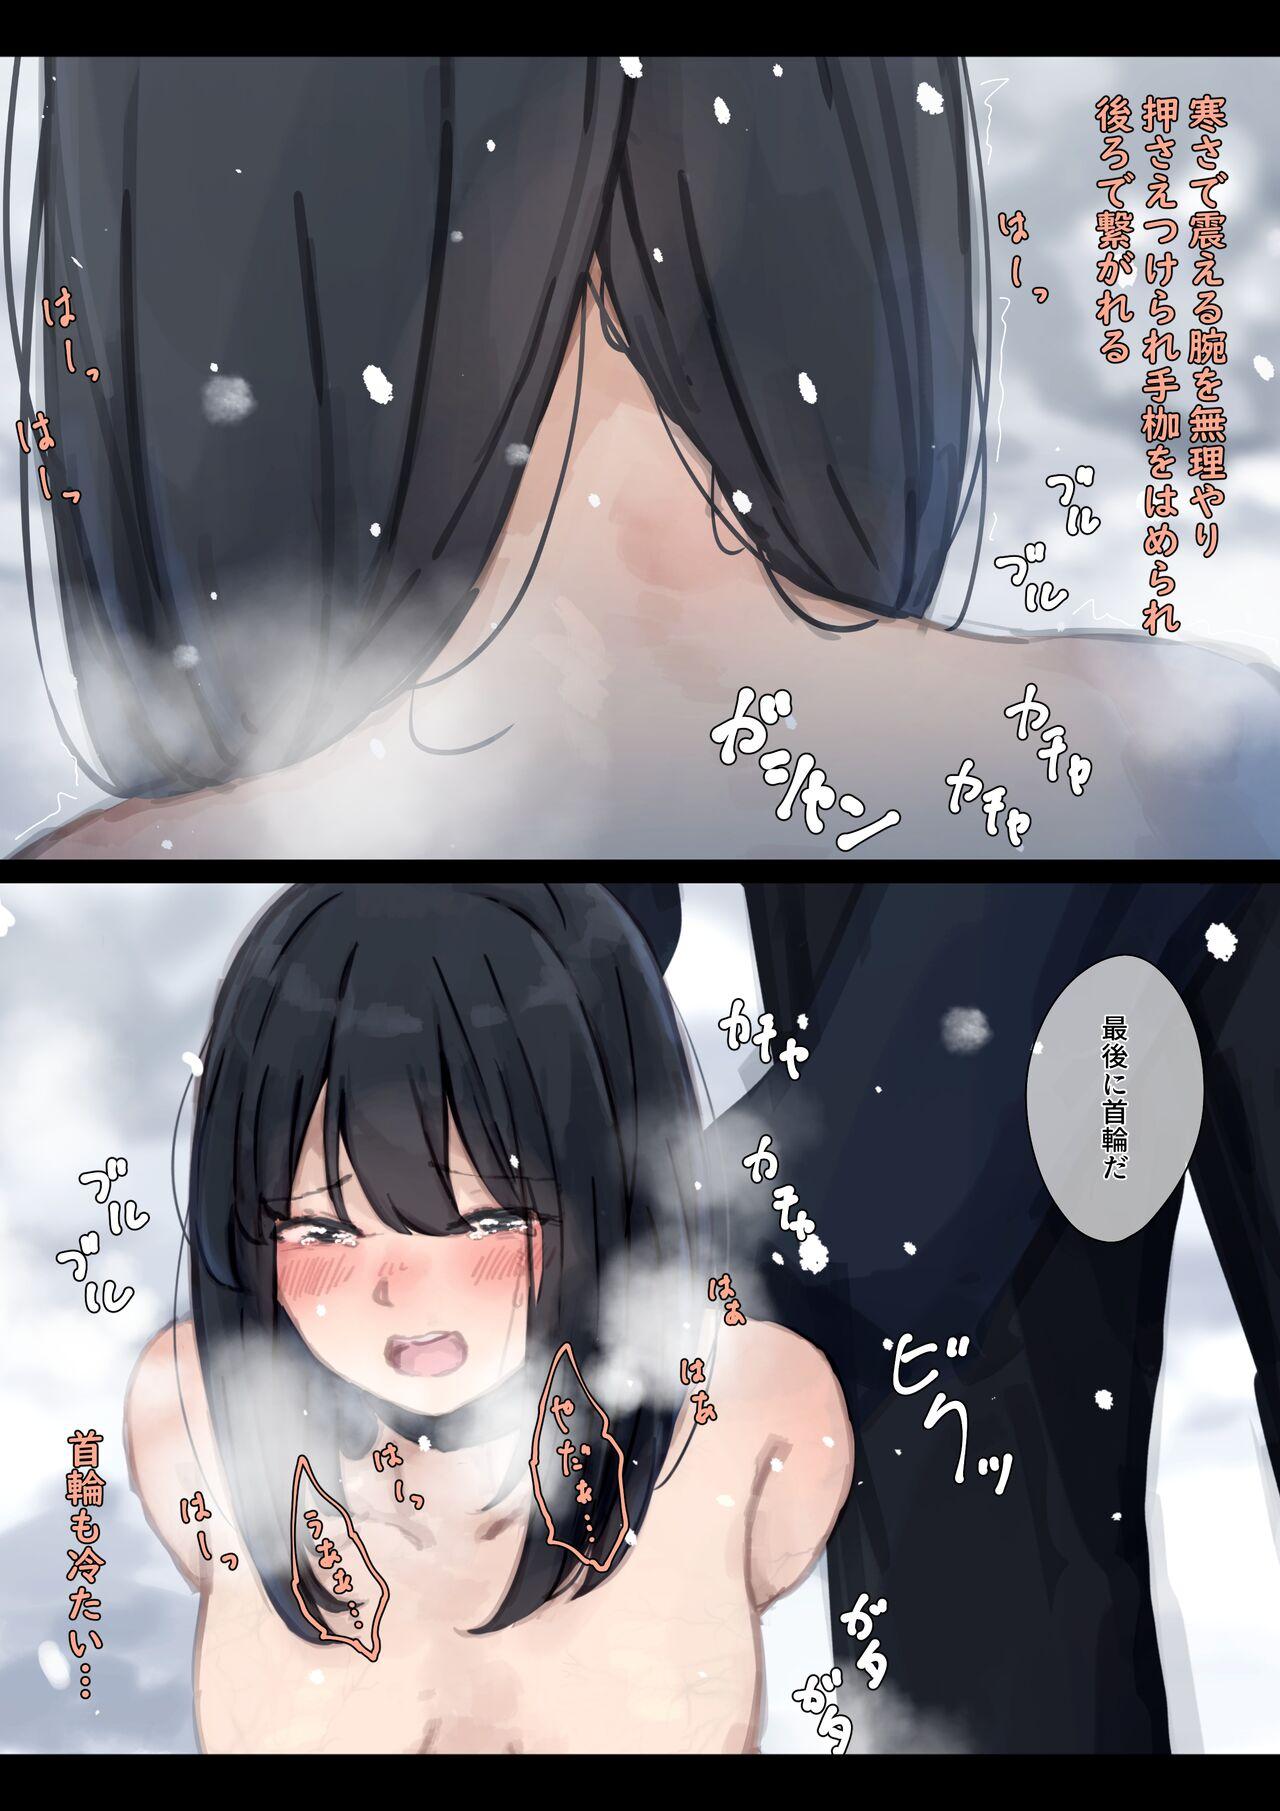 [Yukimuramaru] Public property Sex Slave Girl - Ex - Collection in the Snow - [Digital] [Ongoing] 36